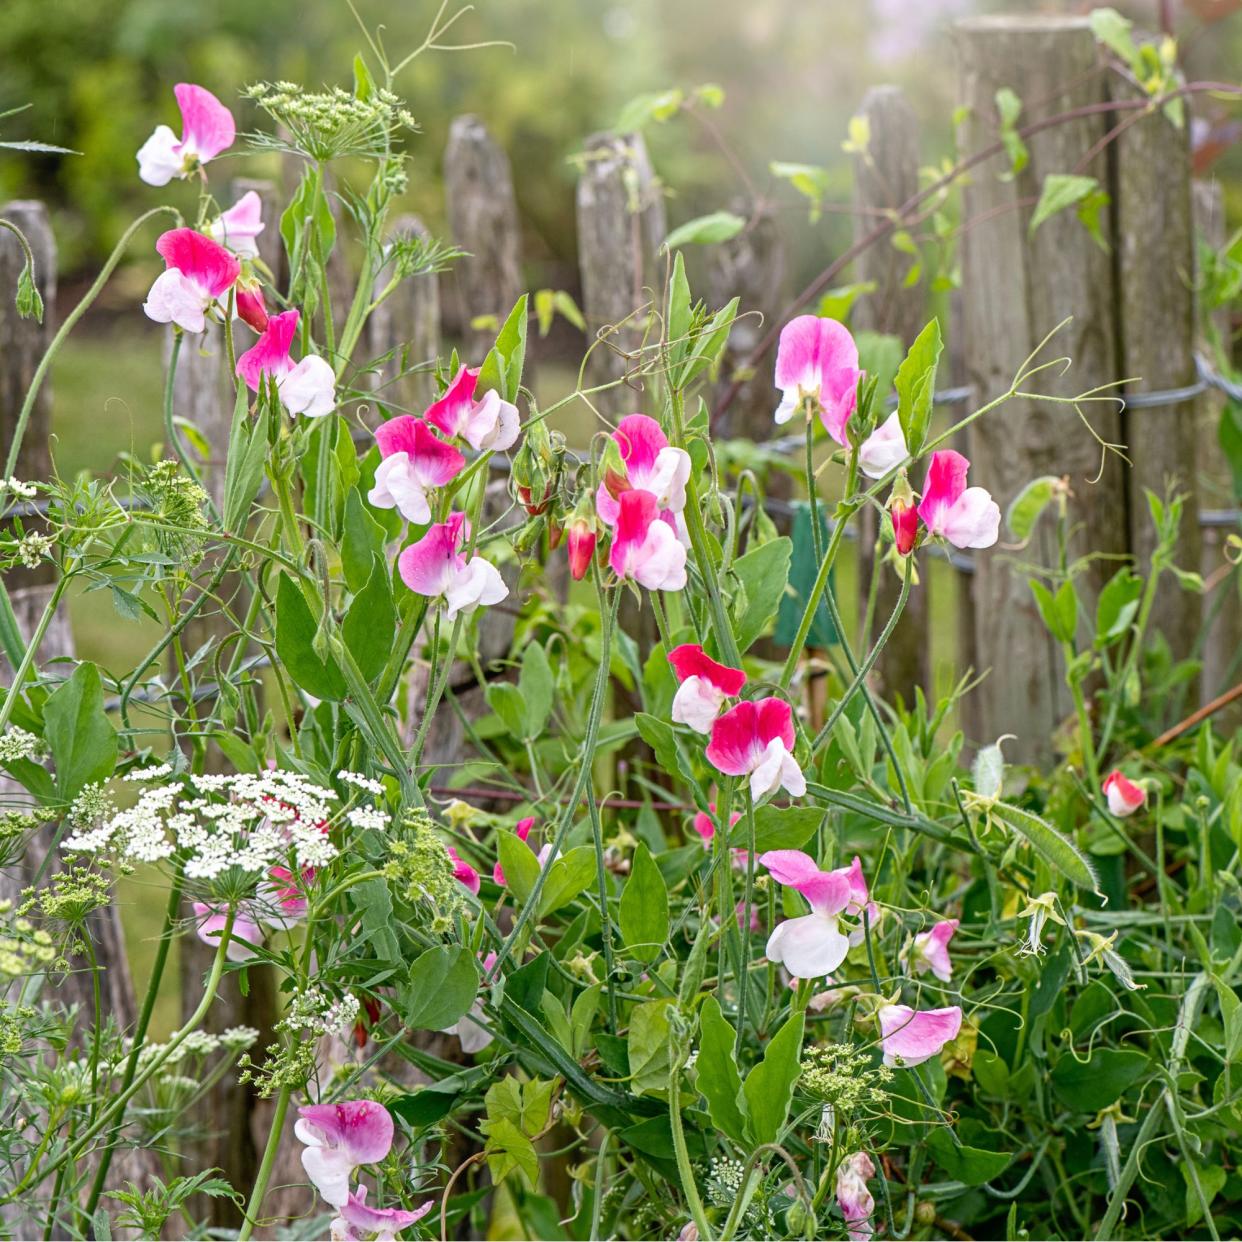  Sweet peas growing and blooming through a rustic wooden fence. 